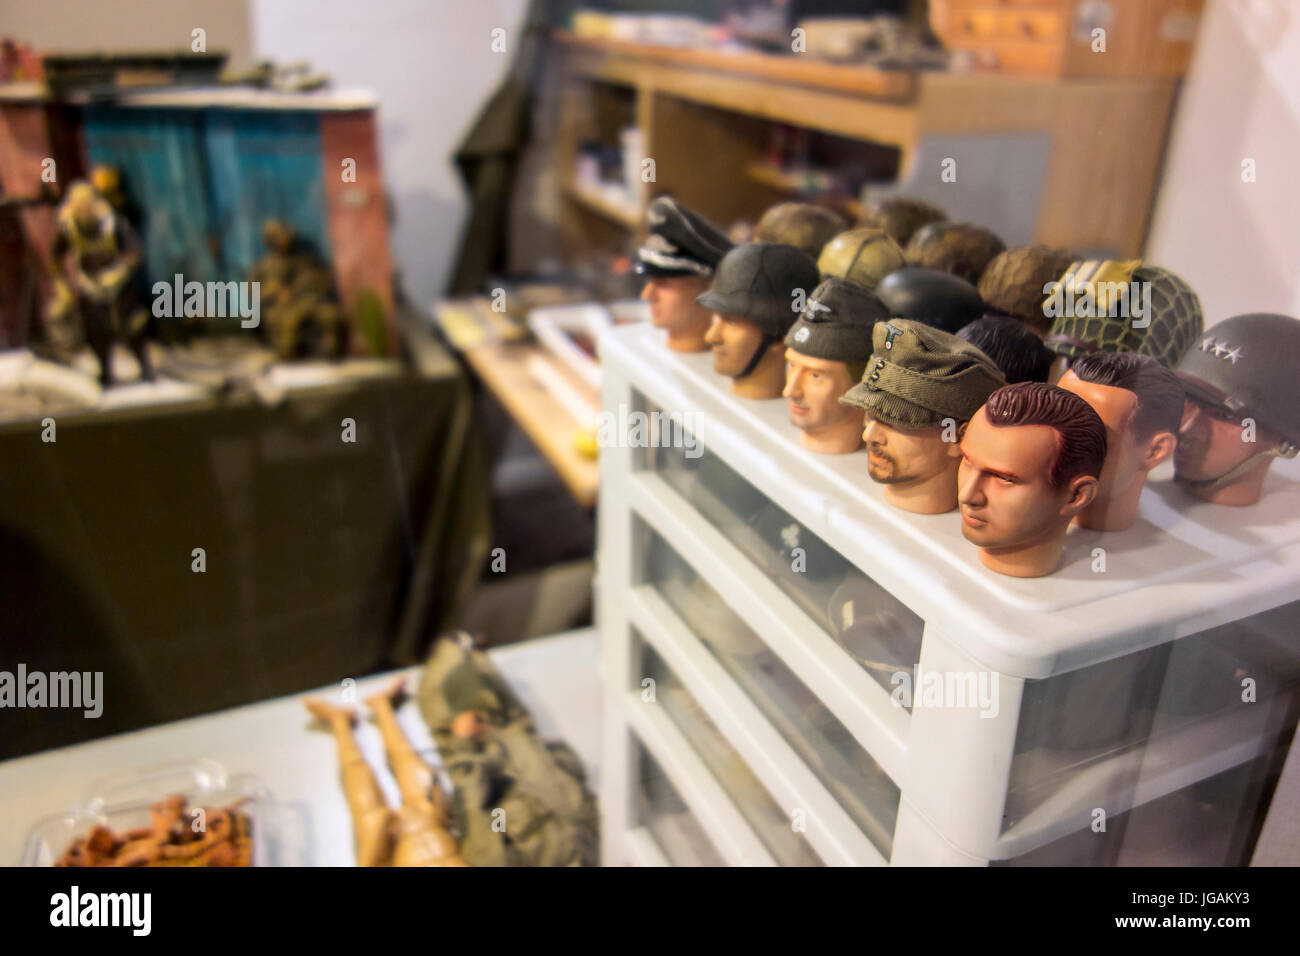 Miniature heads of WW2 soldiers for making scale model battle scene dioramas in workshop Stock Photo